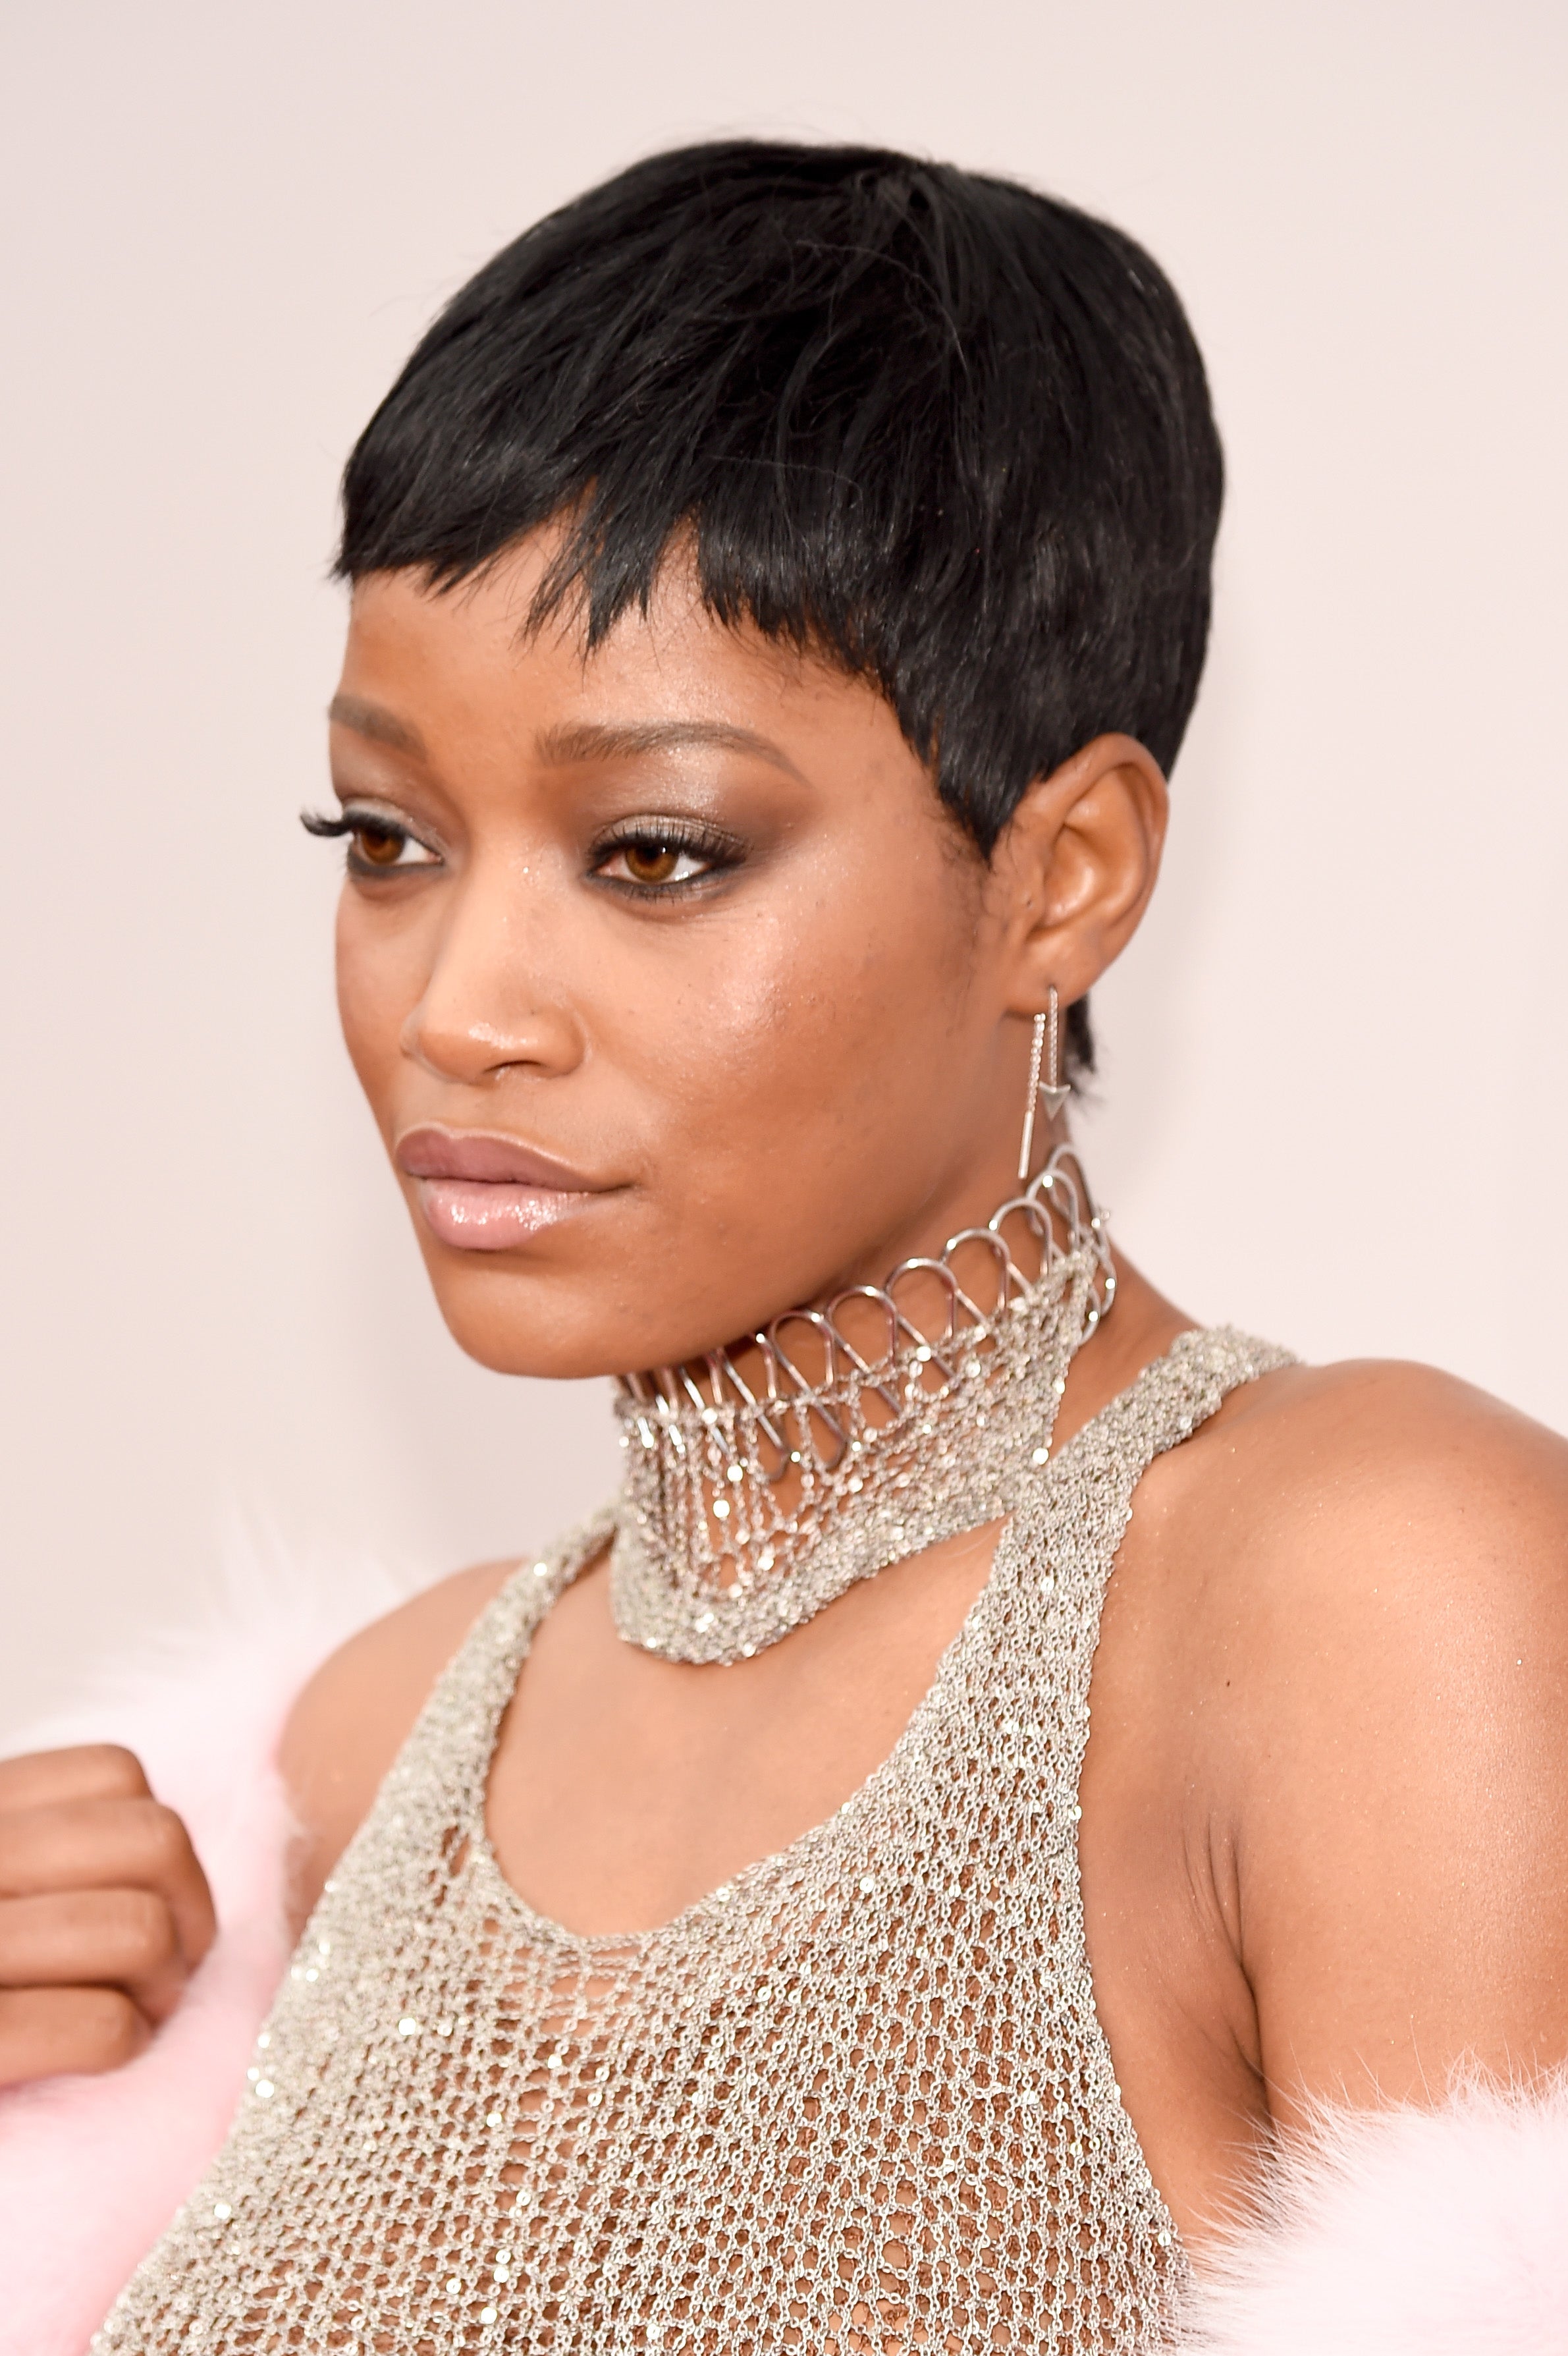 These Are the Only AMA Beauty and Hair Looks You Need To See
